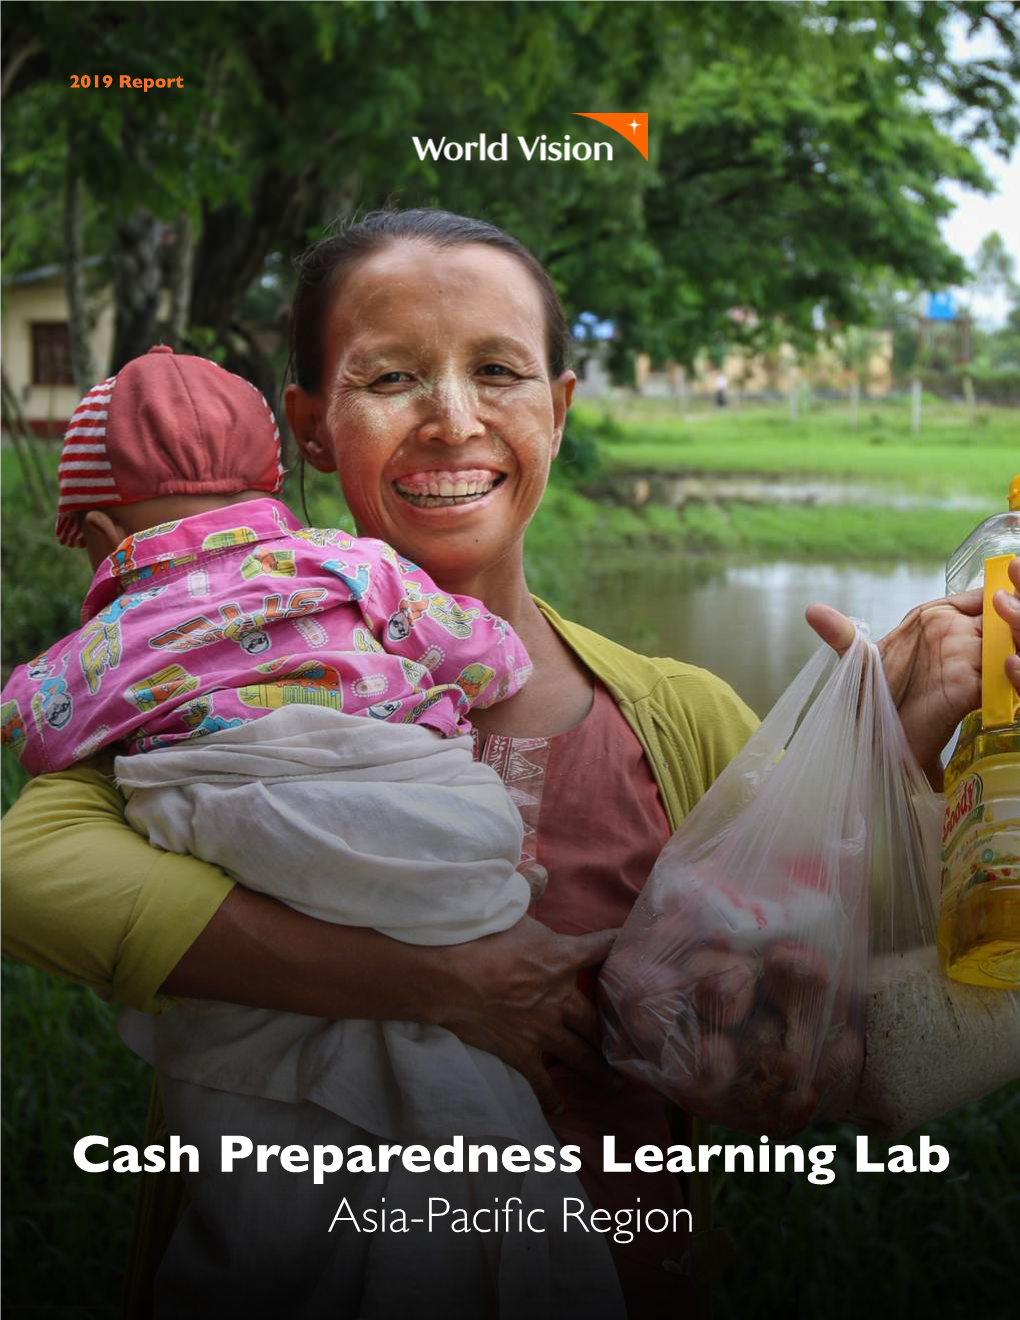 Cash Preparedness Learning Lab Asia-Pacific Region Contents 4 12 Acronyms Indonesia